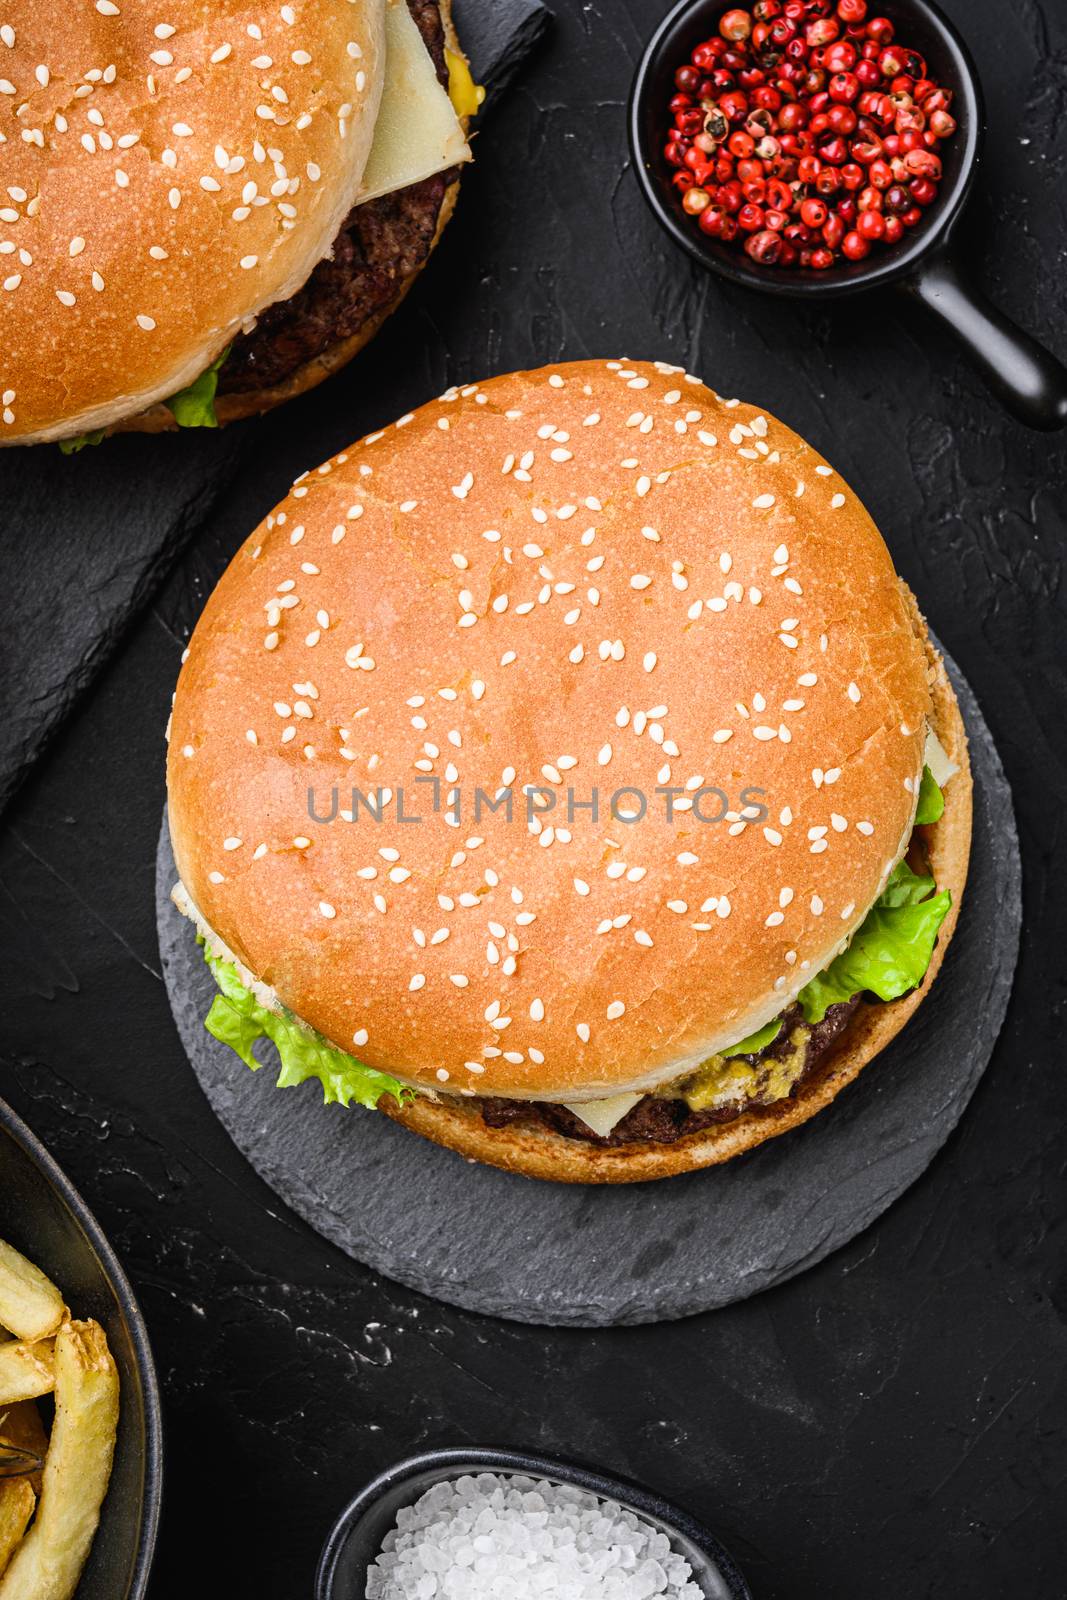 Tasty grilled home made burger on black textured background by Ilianesolenyi